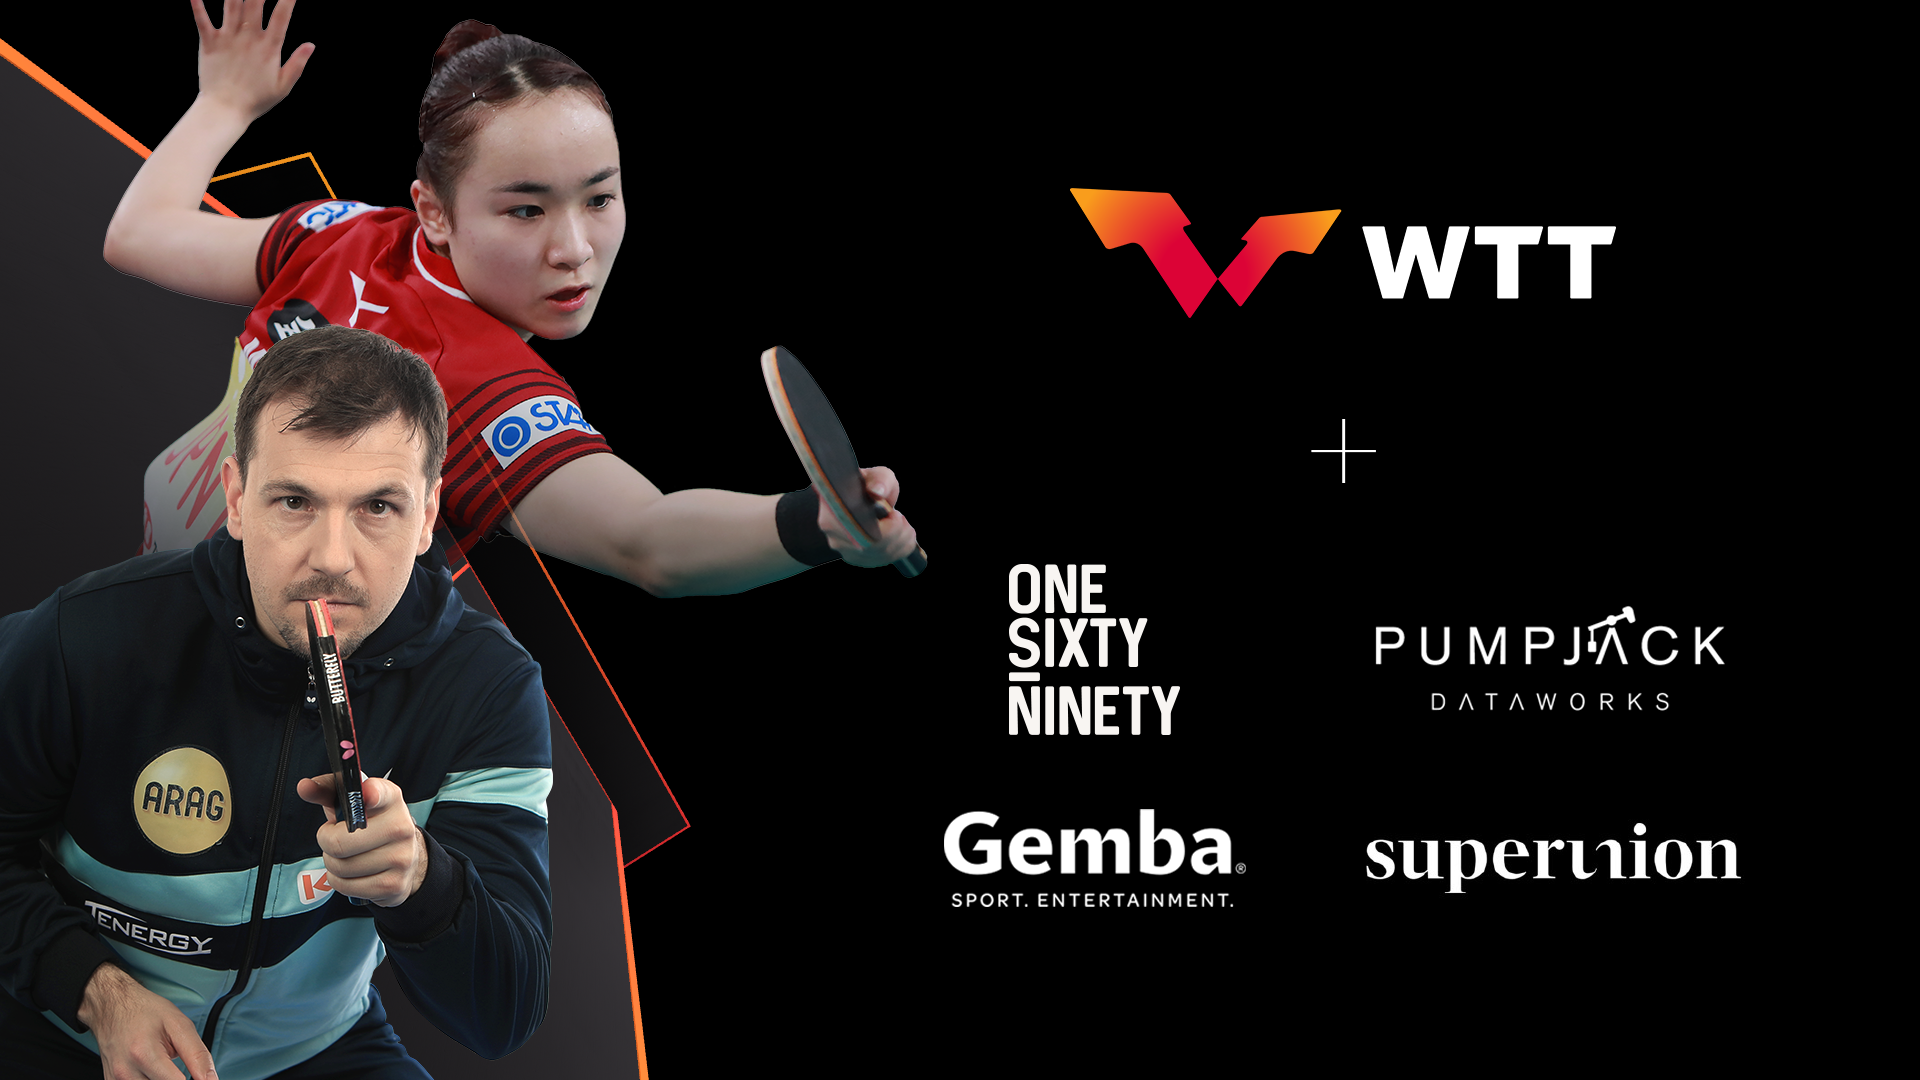 World Table Tennis announces new partnerships ahead of reboot